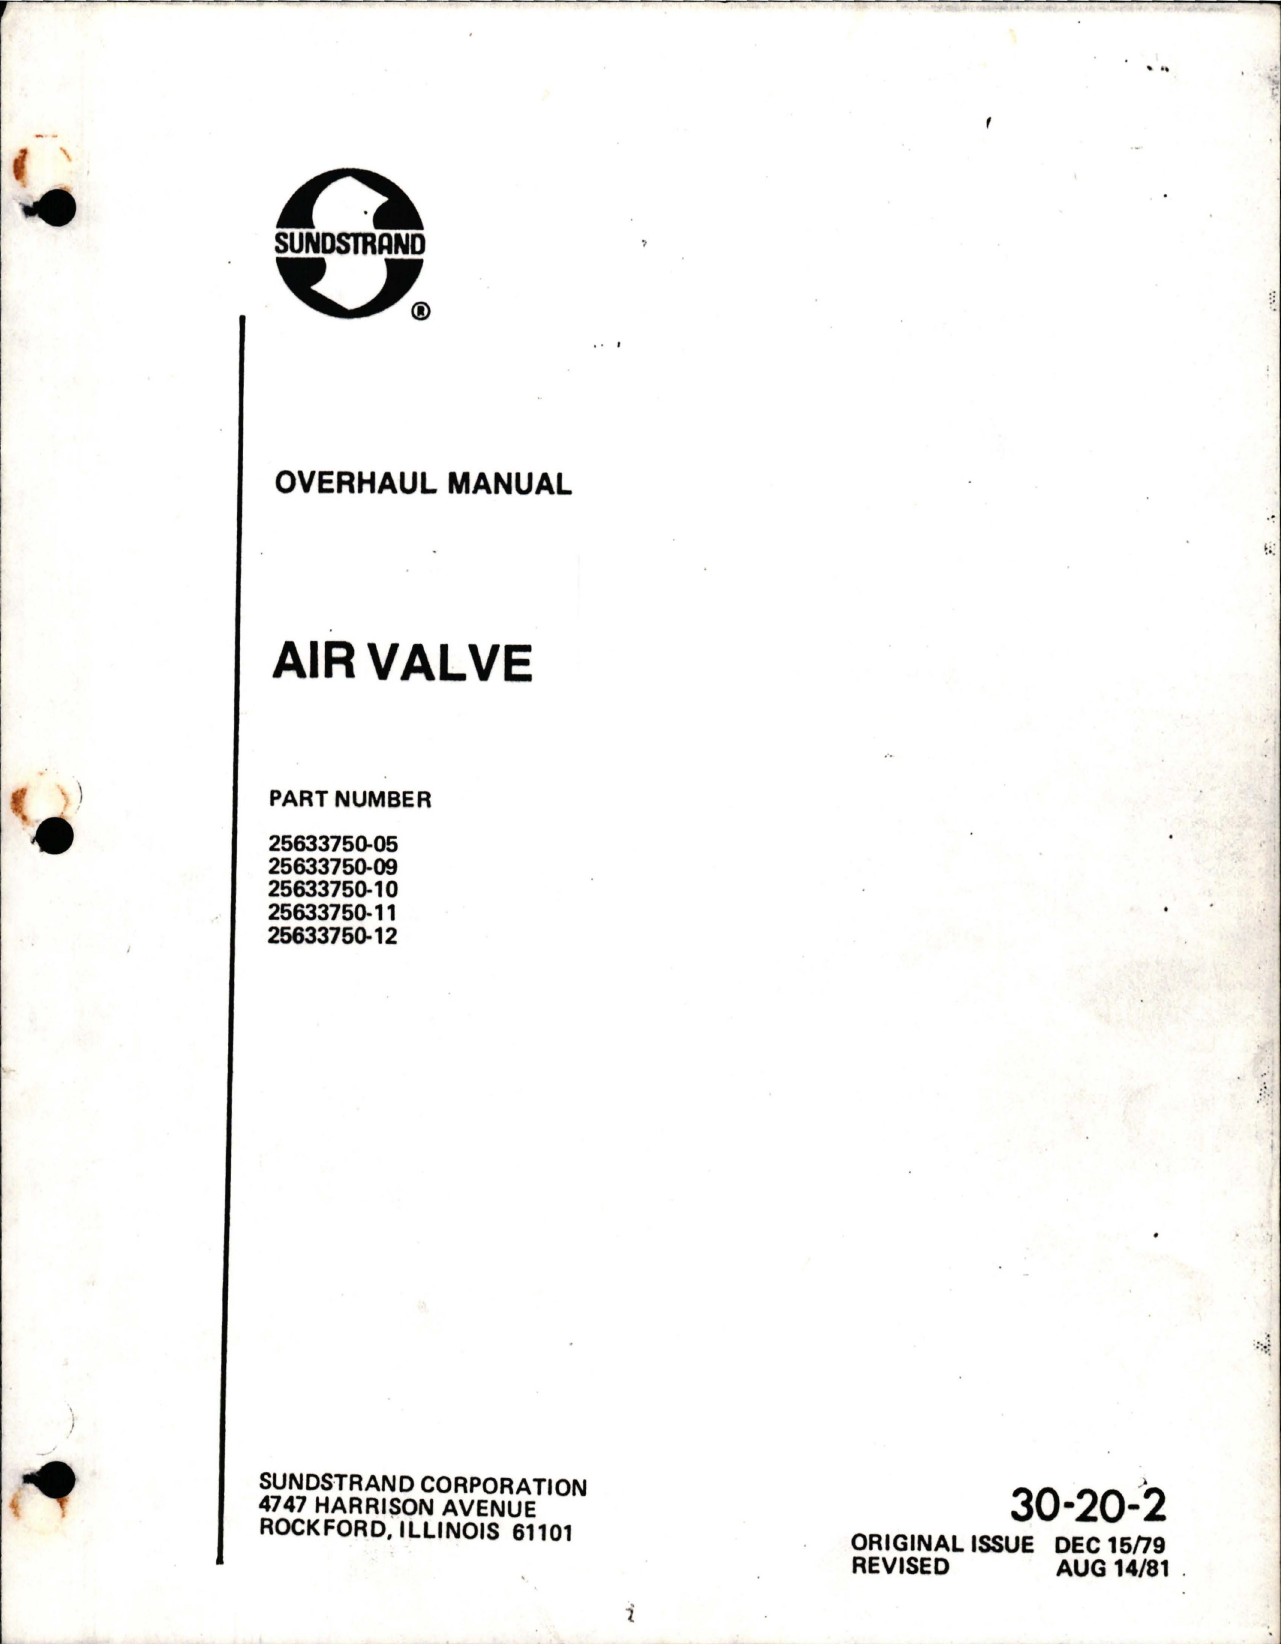 Sample page 1 from AirCorps Library document: Overhaul Manual for Air Valve